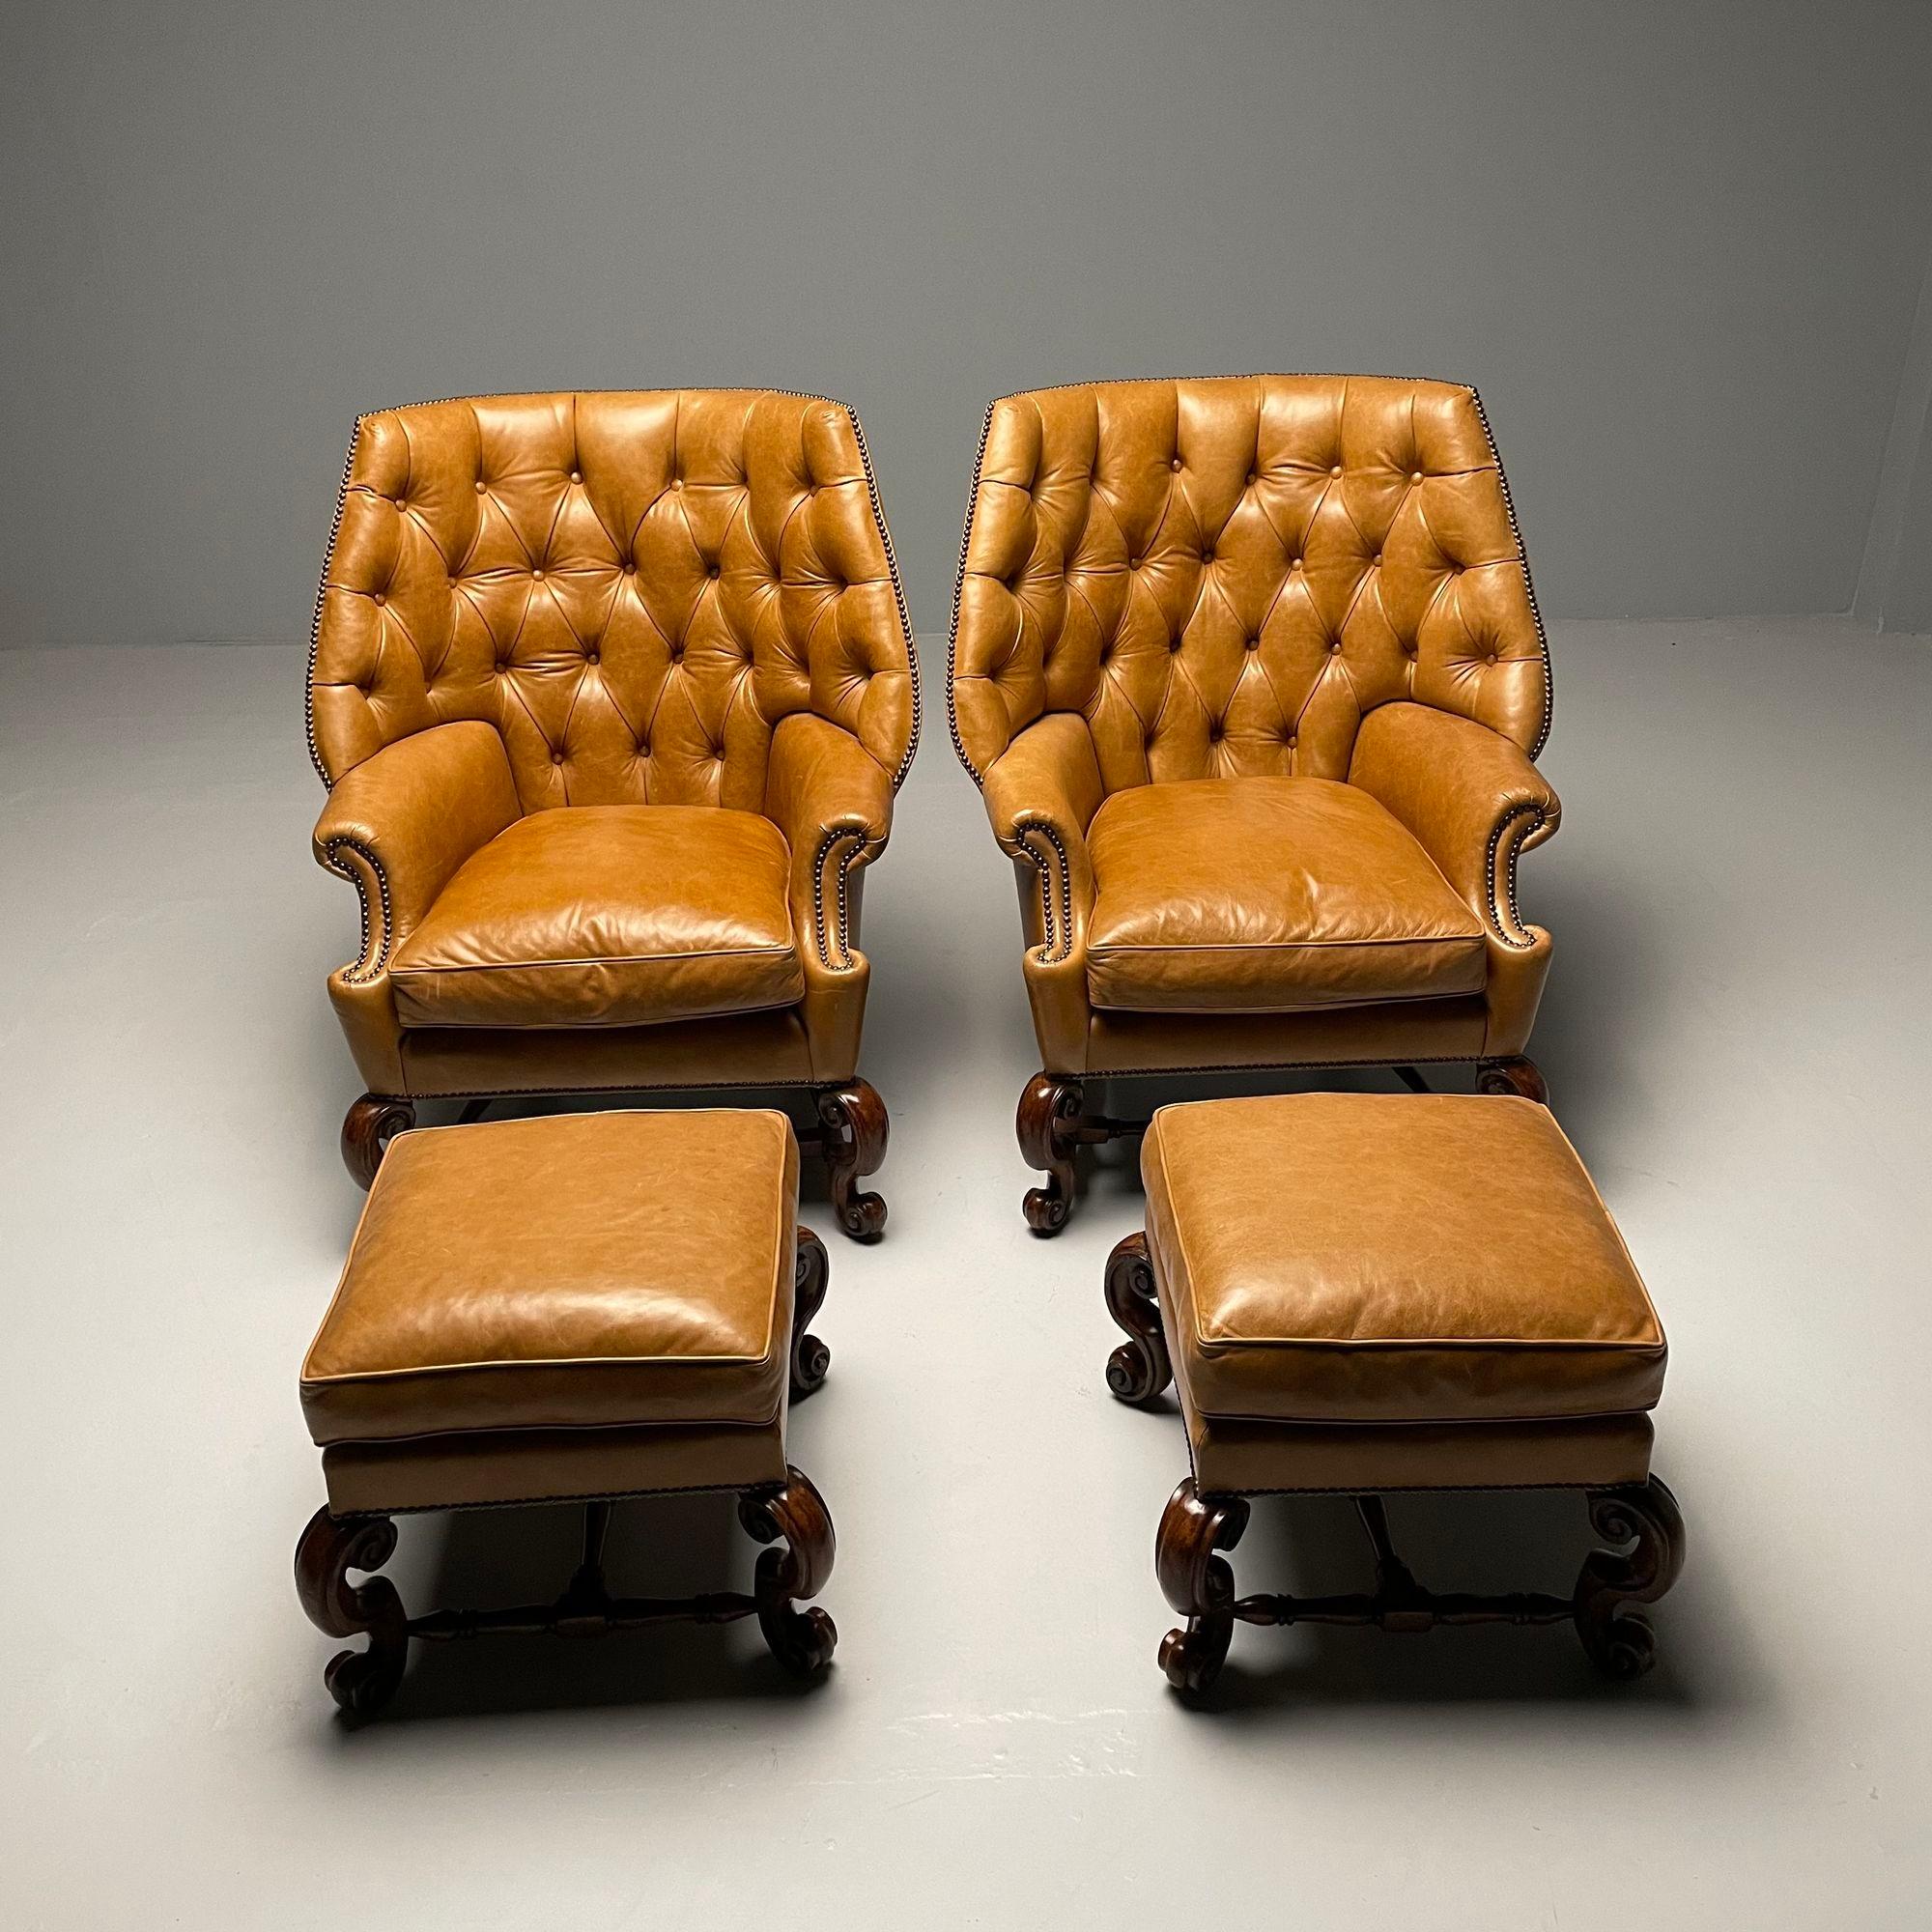 American Georgian, Large Tufted Lounge Chairs and Ottomans, Tan Leather, USA, 2000s For Sale